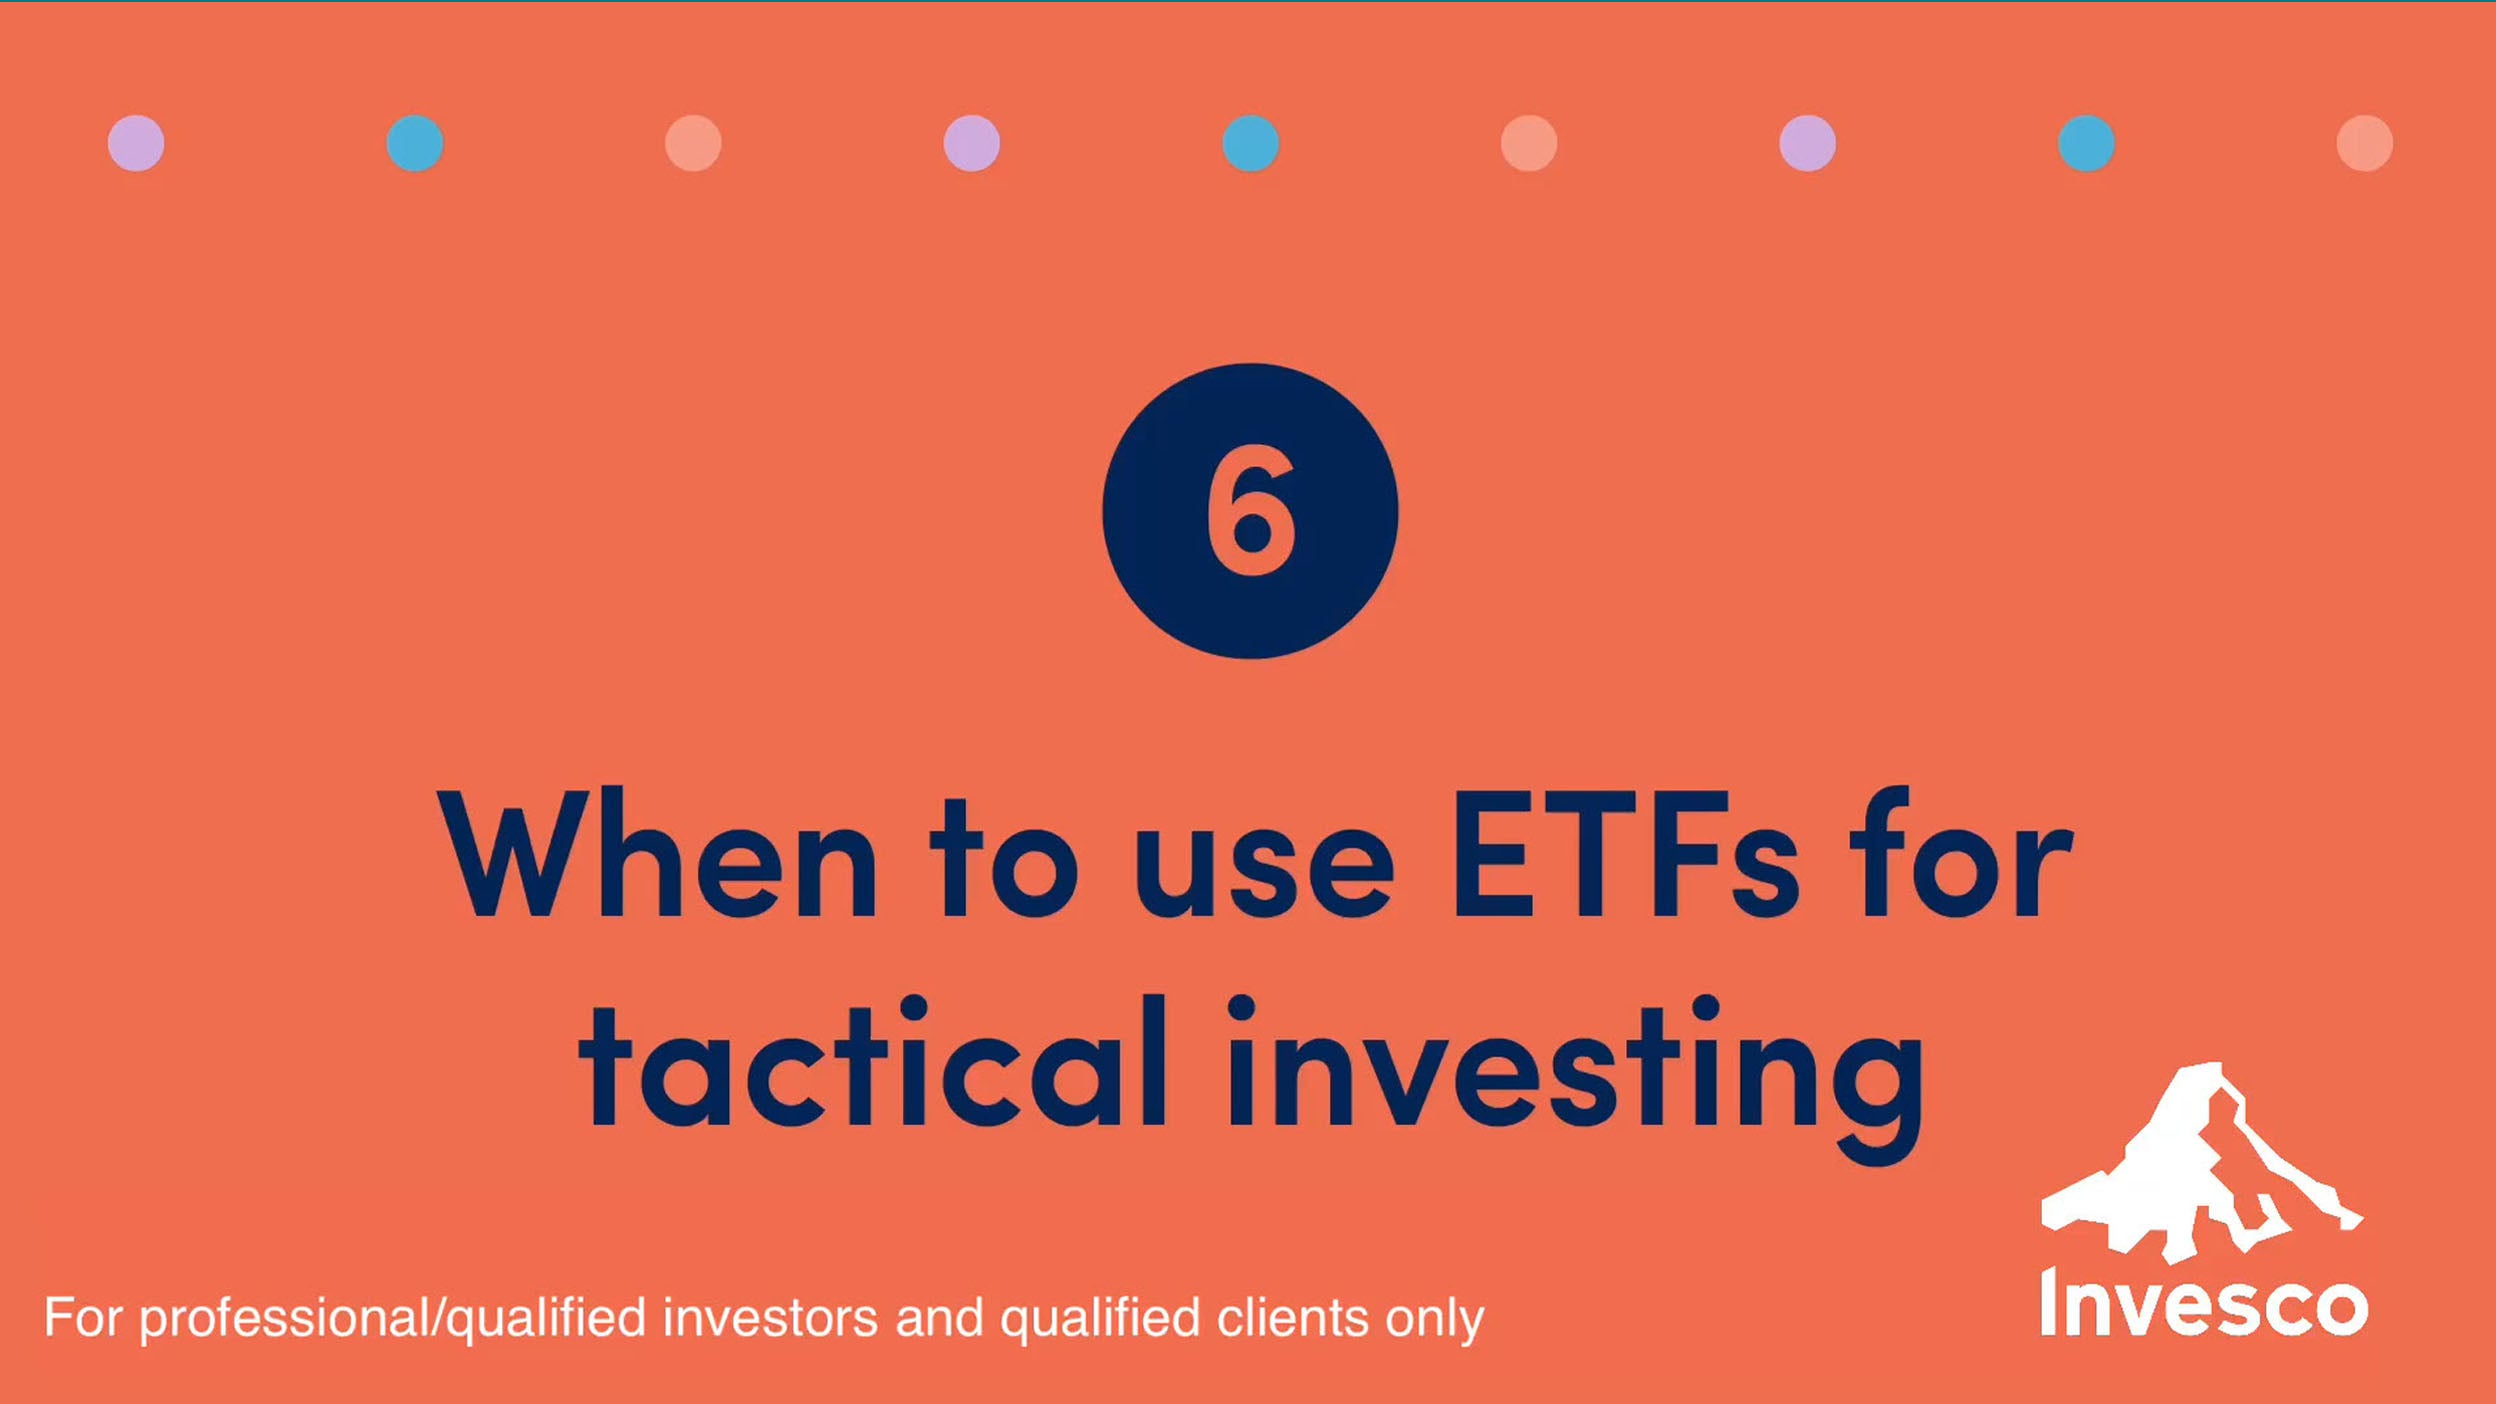 When to use ETFs for tactical investing